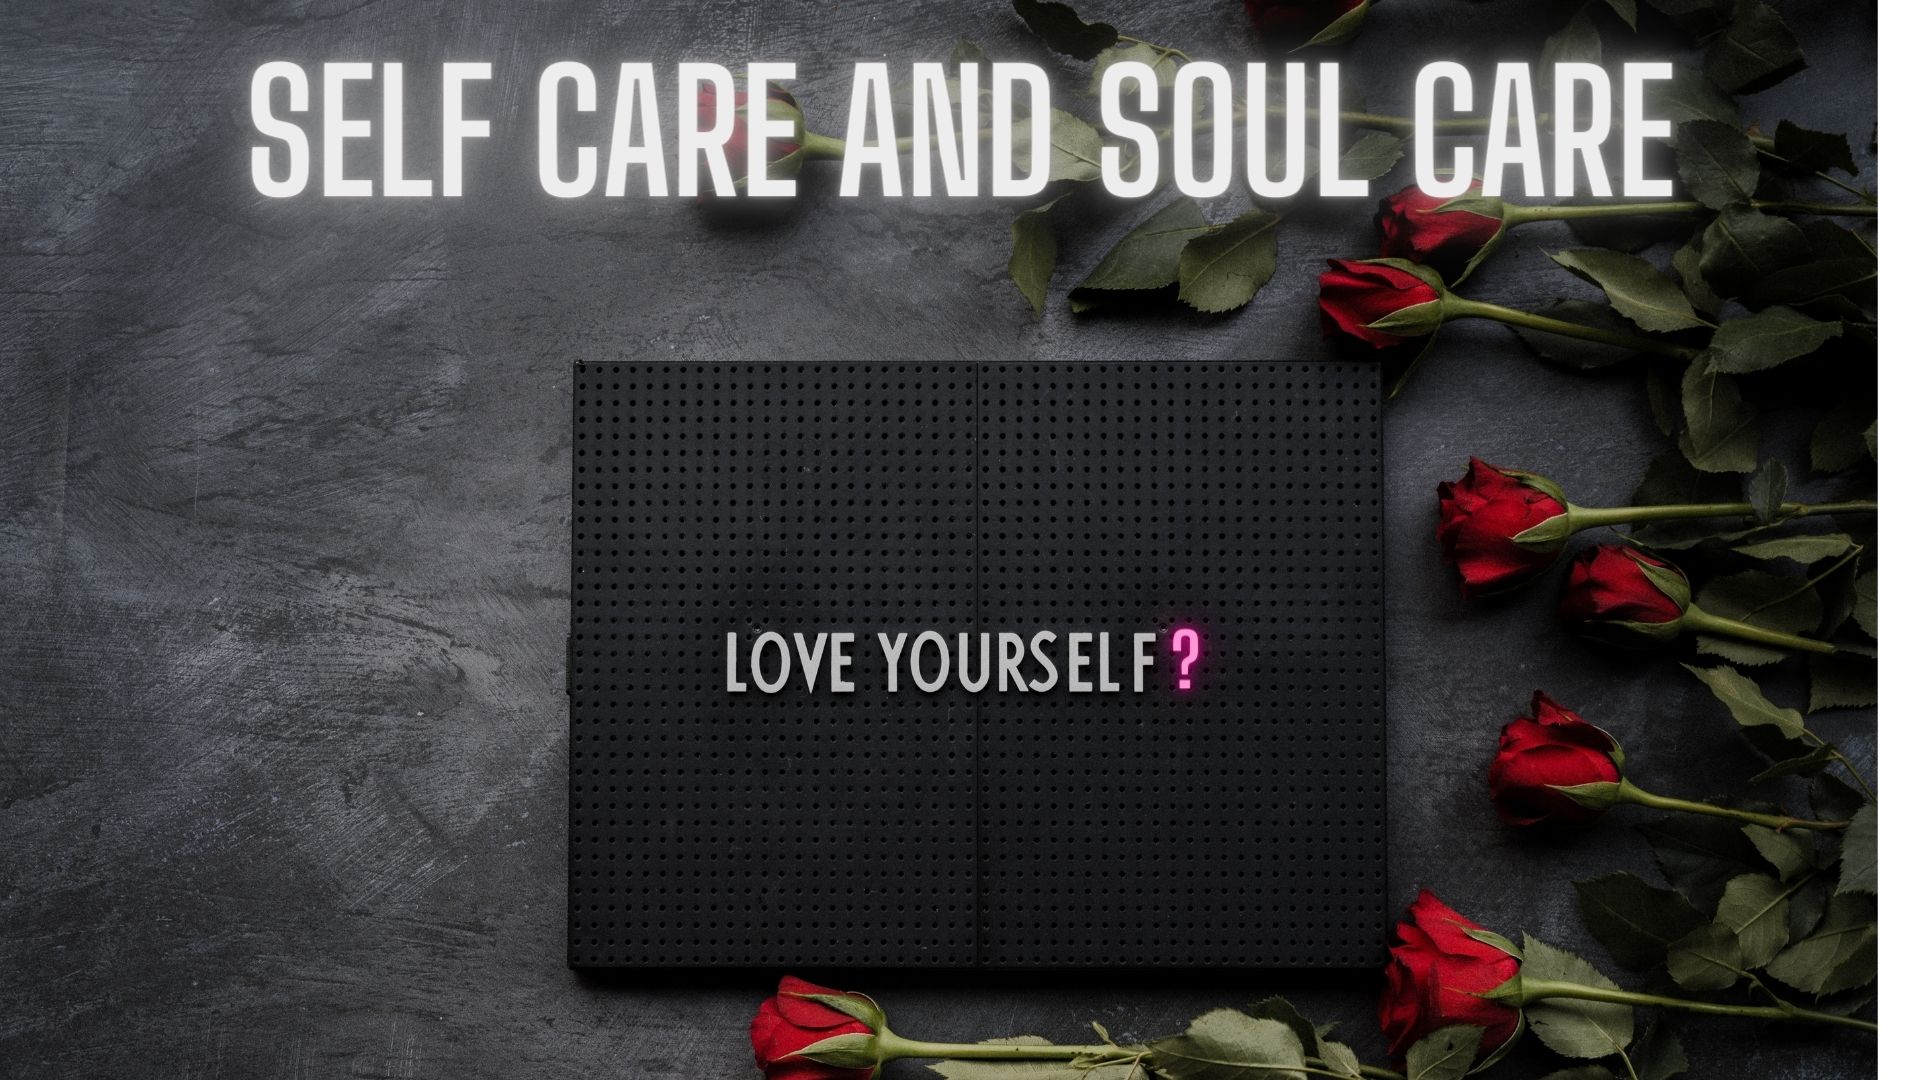 Self Care, Soul Care, and Streetlight’s Vision